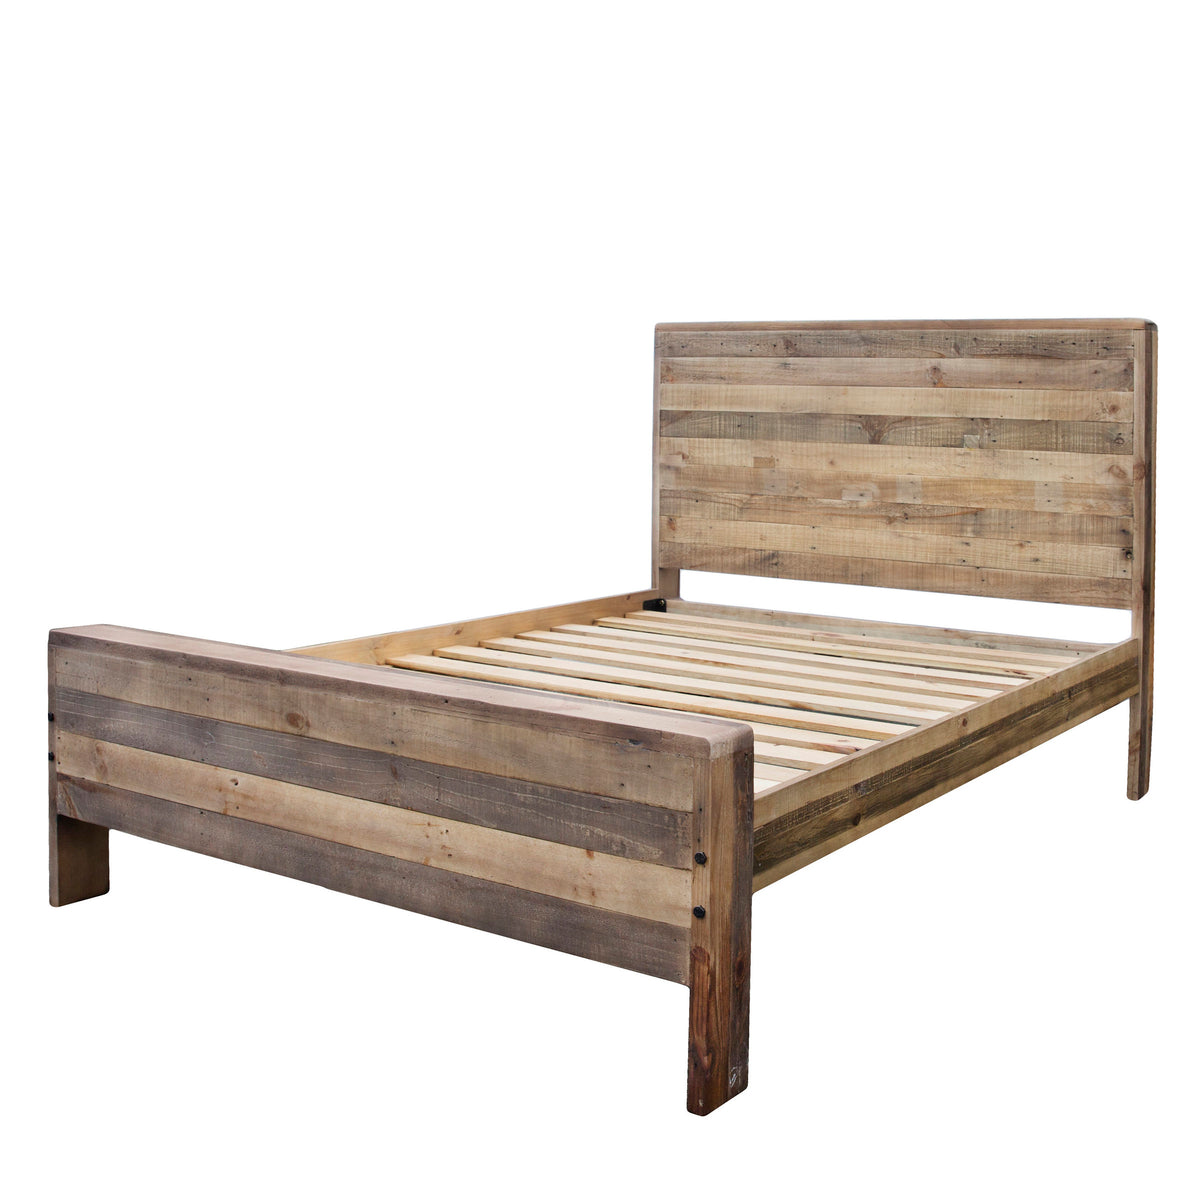 LH Imports Campestre Modern Queen  Bed. Reclaimed pine with raw rustic finish. Modern farmhouse style. LH Imports Campestre Modern King Bed. Reclaimed pine with raw rustic finish. Modern farmhouse style.